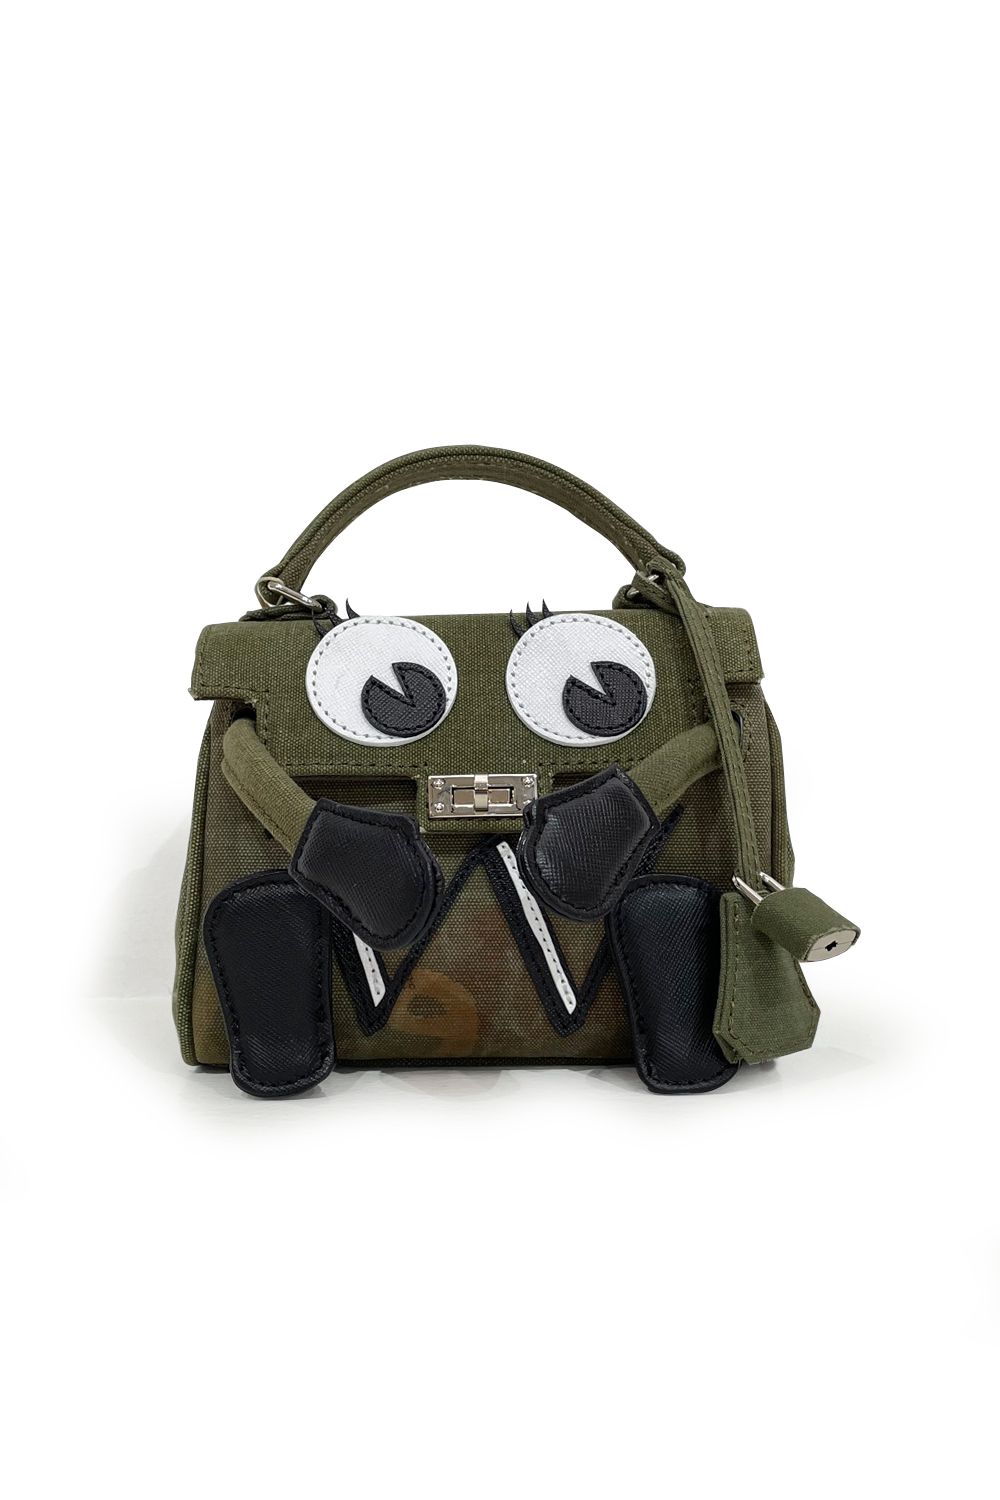 READYMADE - READYMADE × Dr.Woo Dr.Woo MONSTER BAG | laid-back